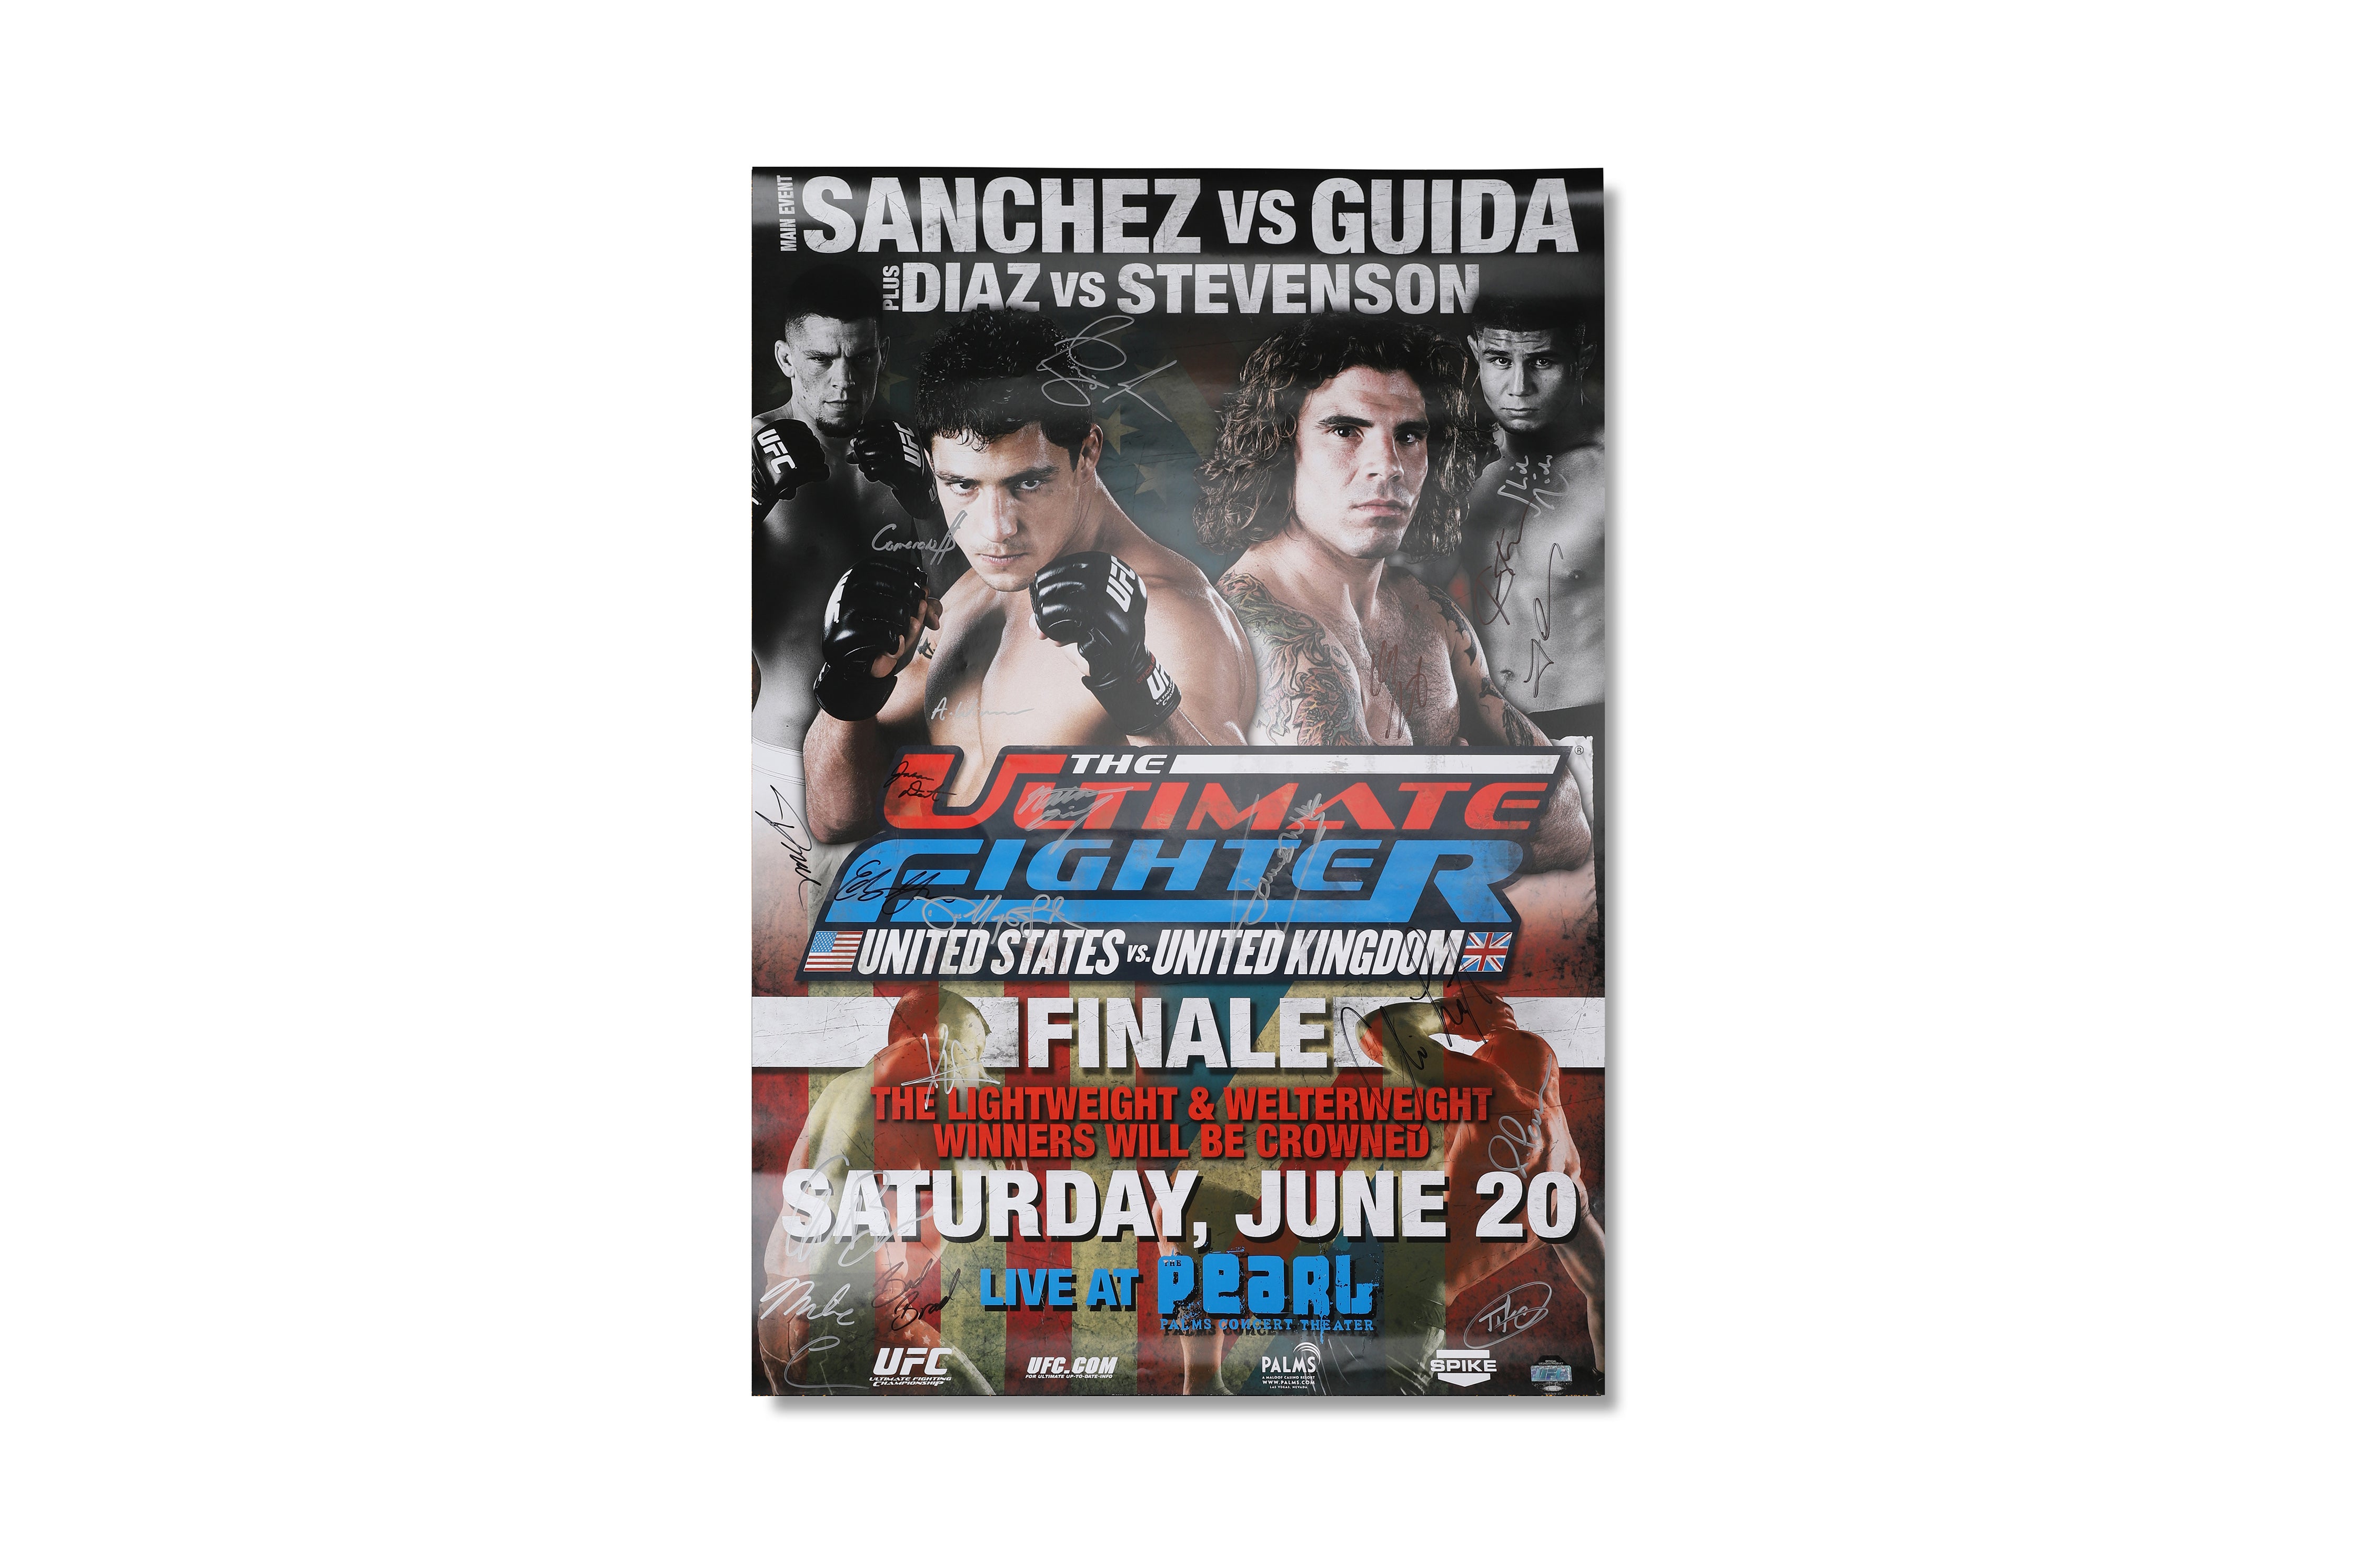 The Ultimate Fighter: United States vs United Kingdom Autographed Poster